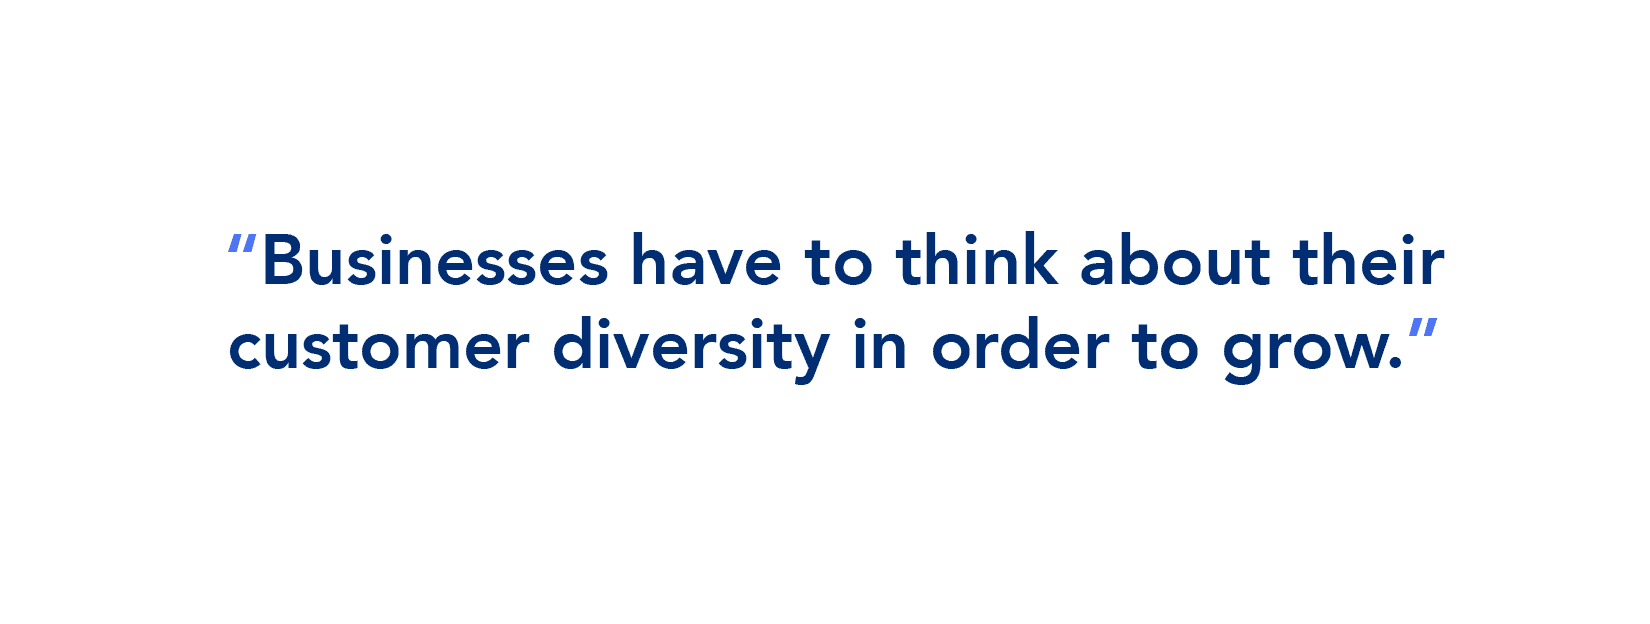 "Businesses have to think about their customer diversity in order to grow."